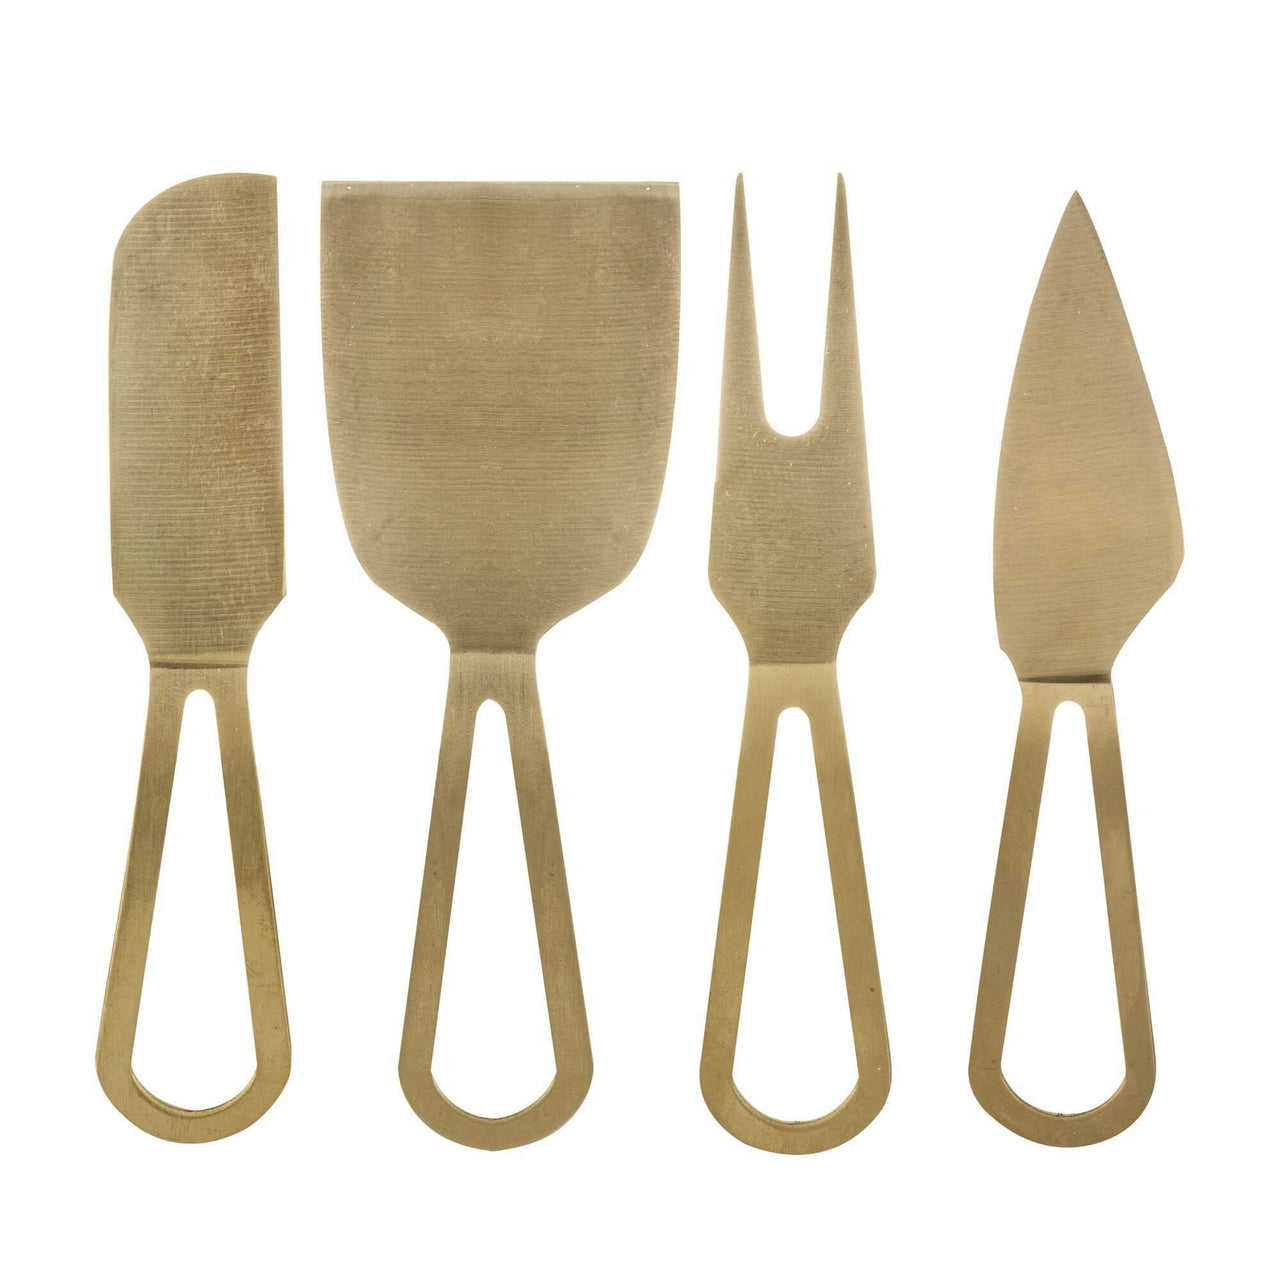 4 Piece Gold Orson Cheese Knife Set